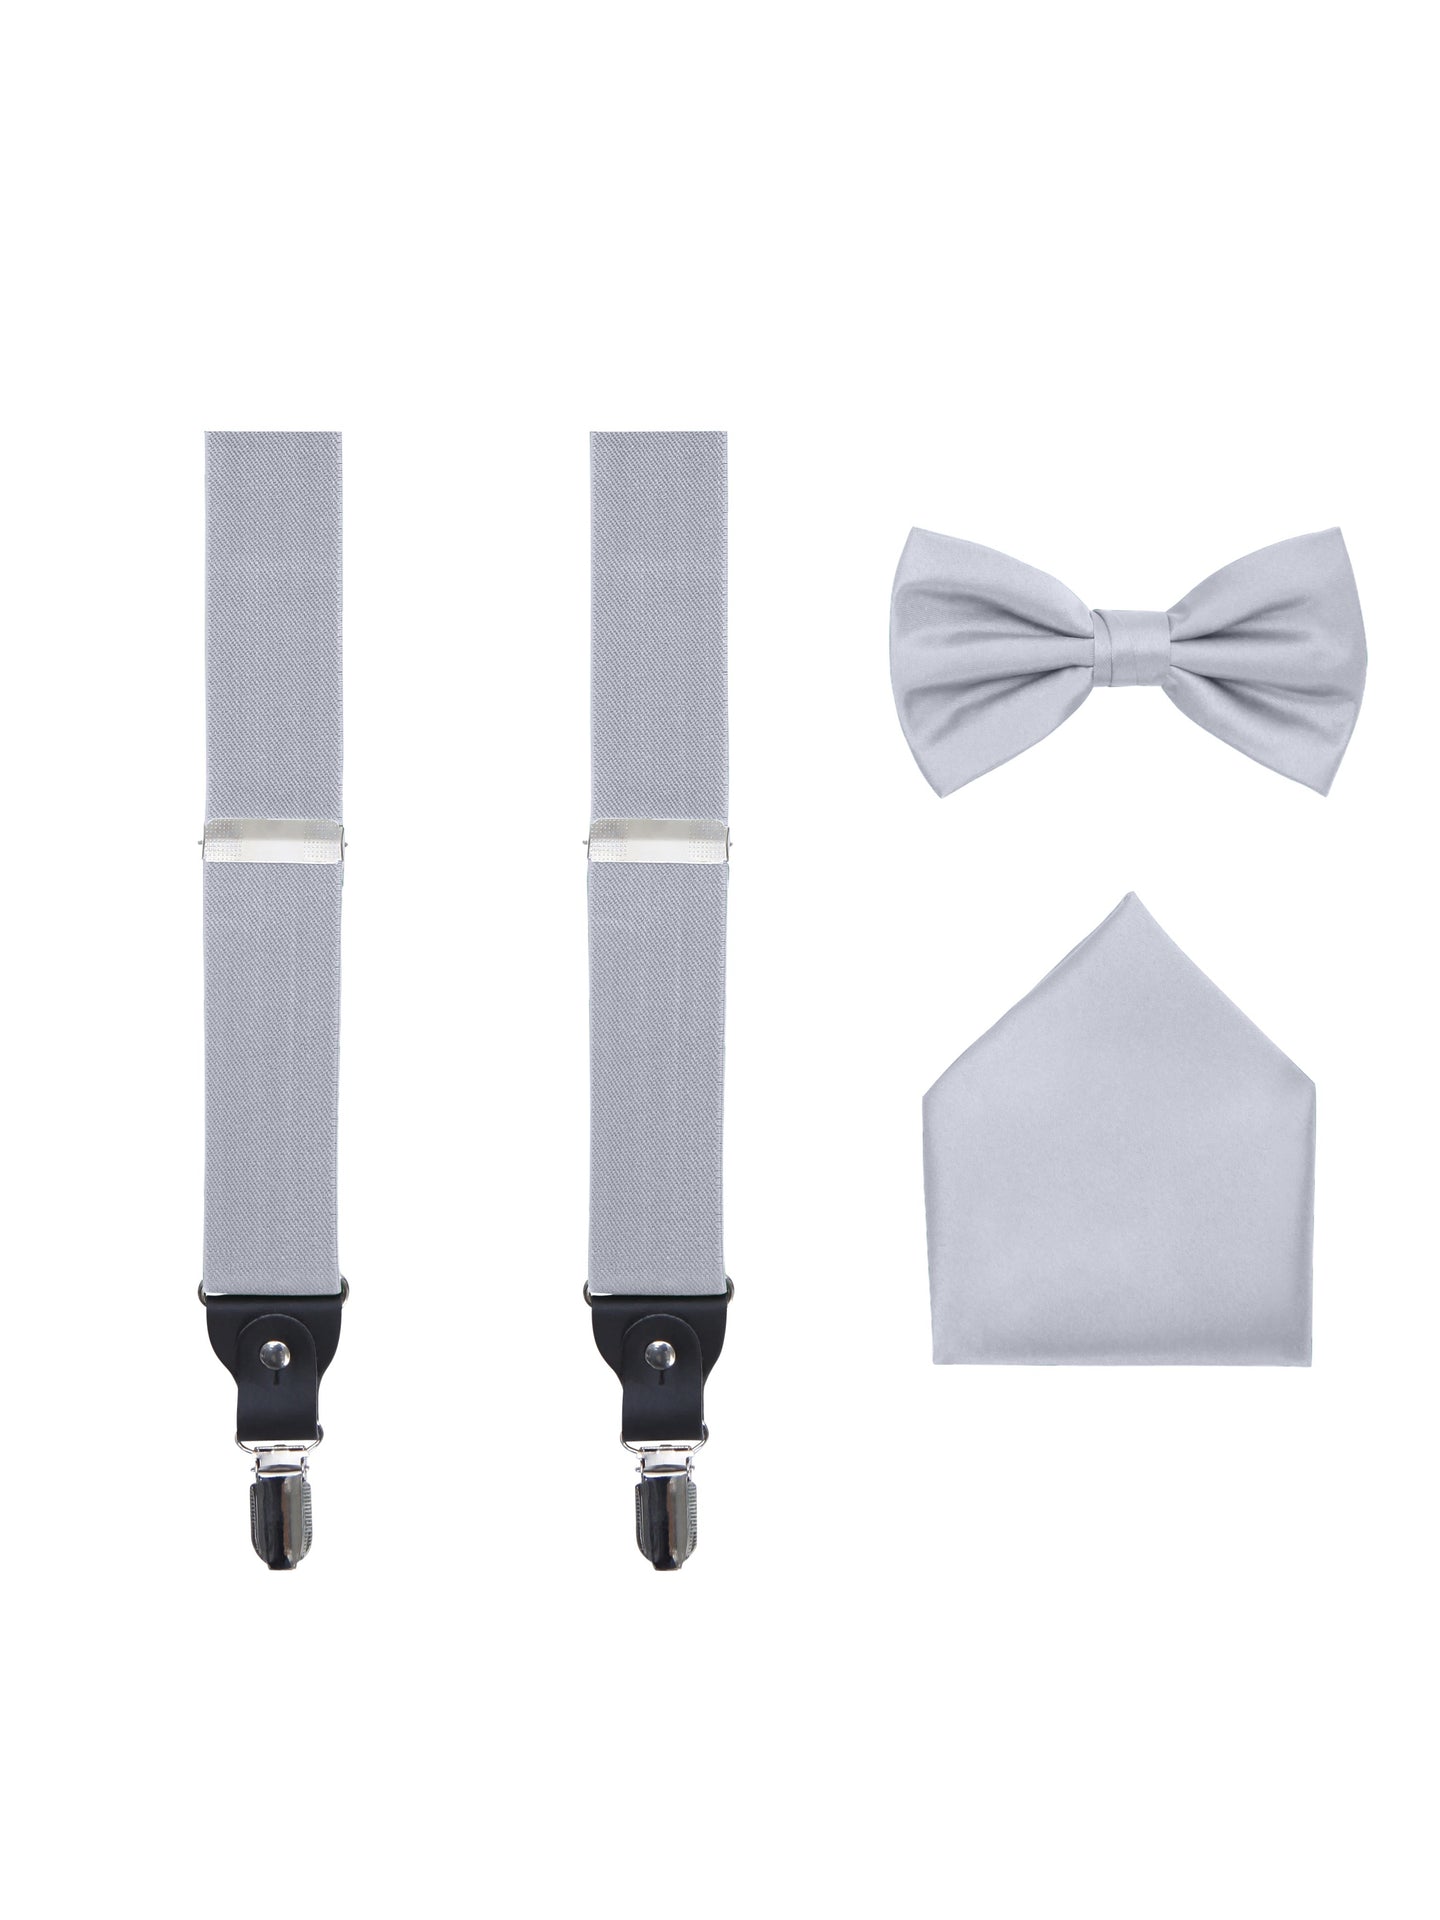 S.H. Churchill & Co. Men's 3 Piece Silver Suspender Set - Includes Suspenders, Matching Bow Tie, Pocket Hanky and Gift Box